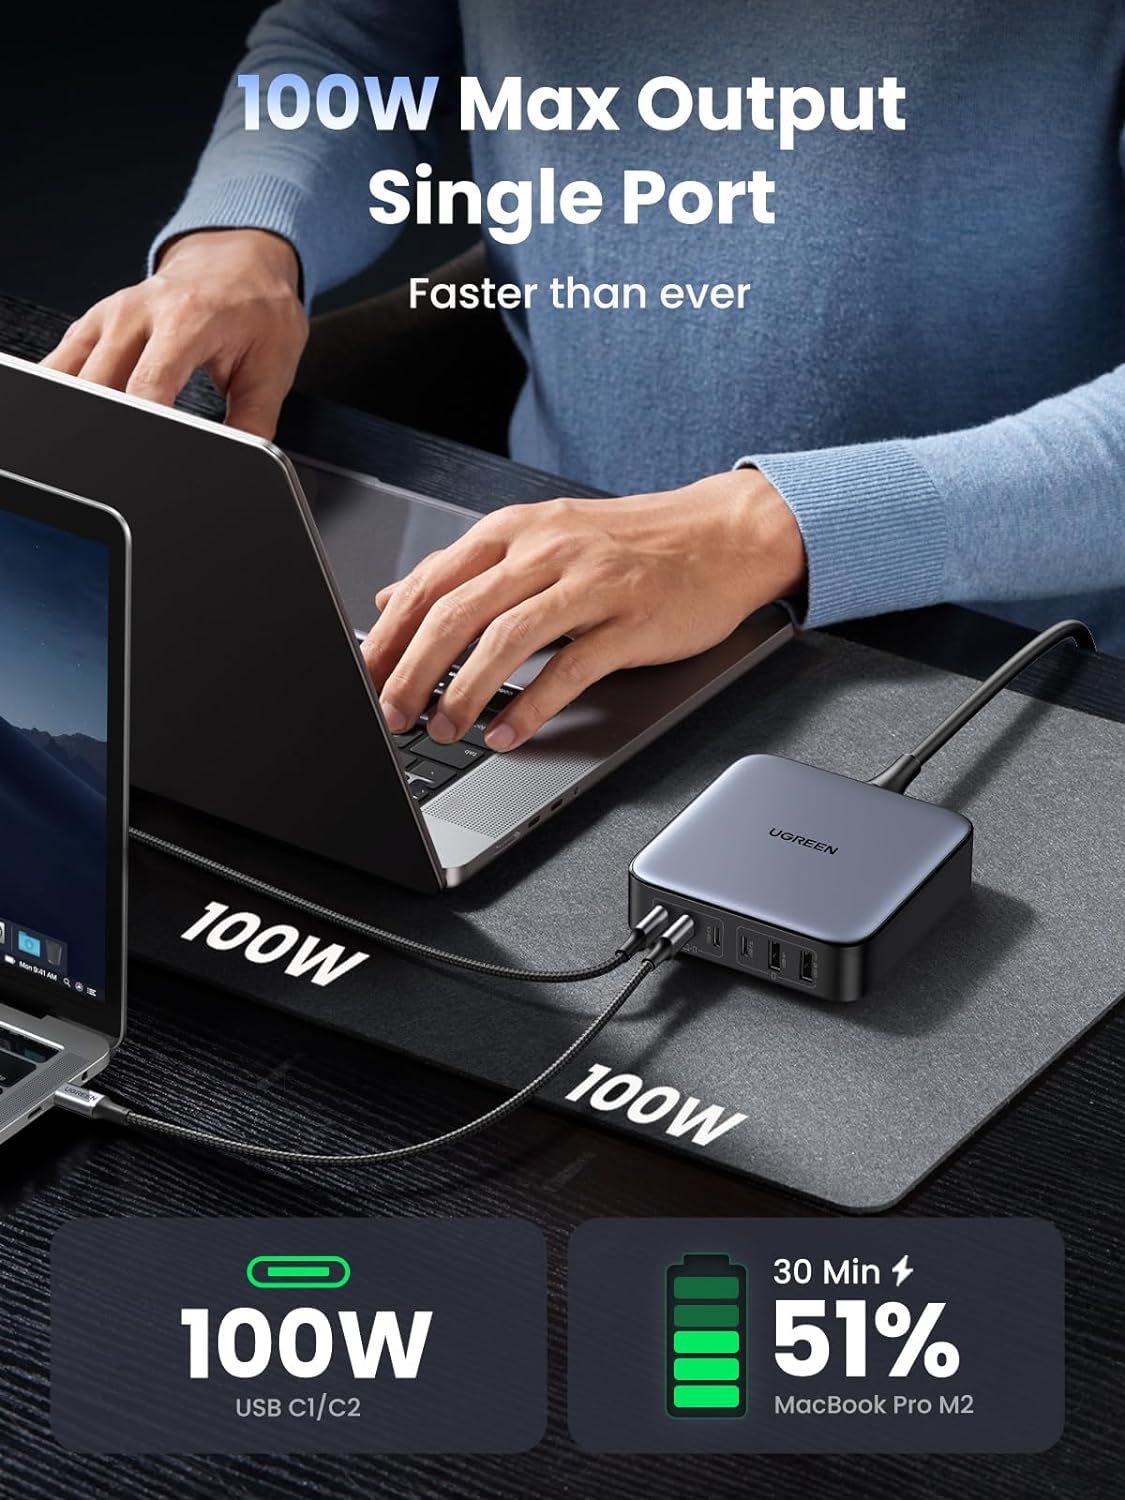 UGREEN 100W USB C Wall Charger - 4 Port GaN PD Fast Charger USB-C Power  Adapter Compatible with MacBook Pro/Air, Dell XPS, iPad Mini/Pro, iPhone  13/13 Pro Max/iPhone 12, Galaxy S22/S21, Pixel 